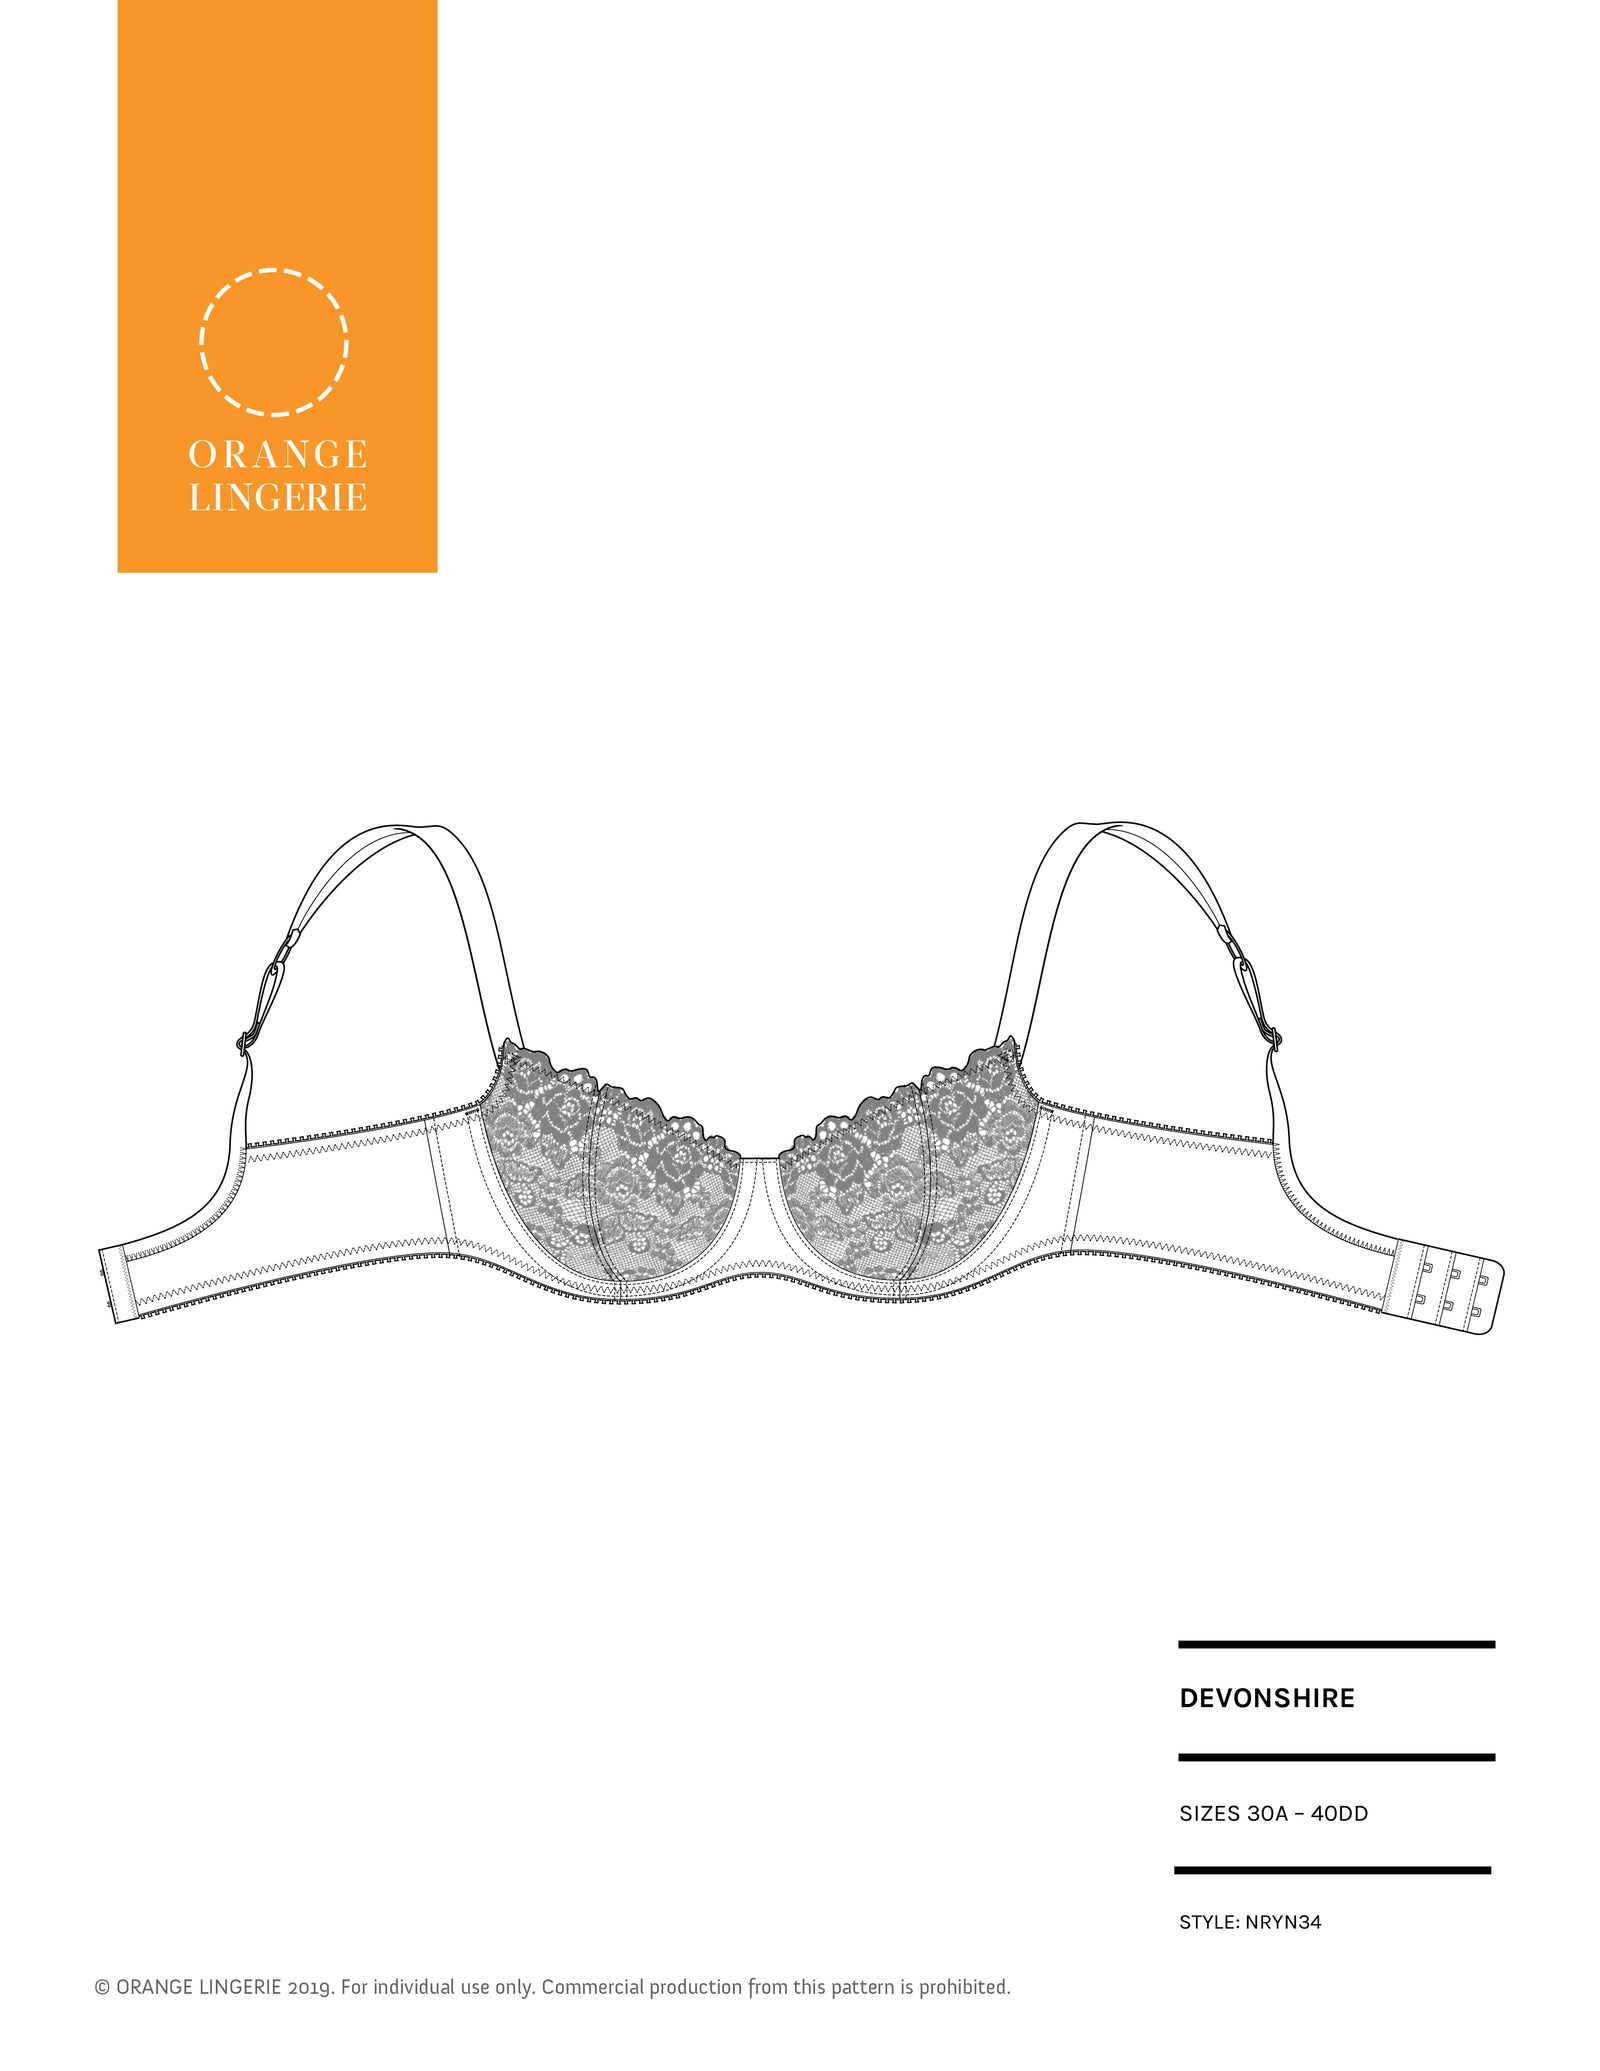 Inspiration for Sewing the Mystic Bra - Orange Lingerie